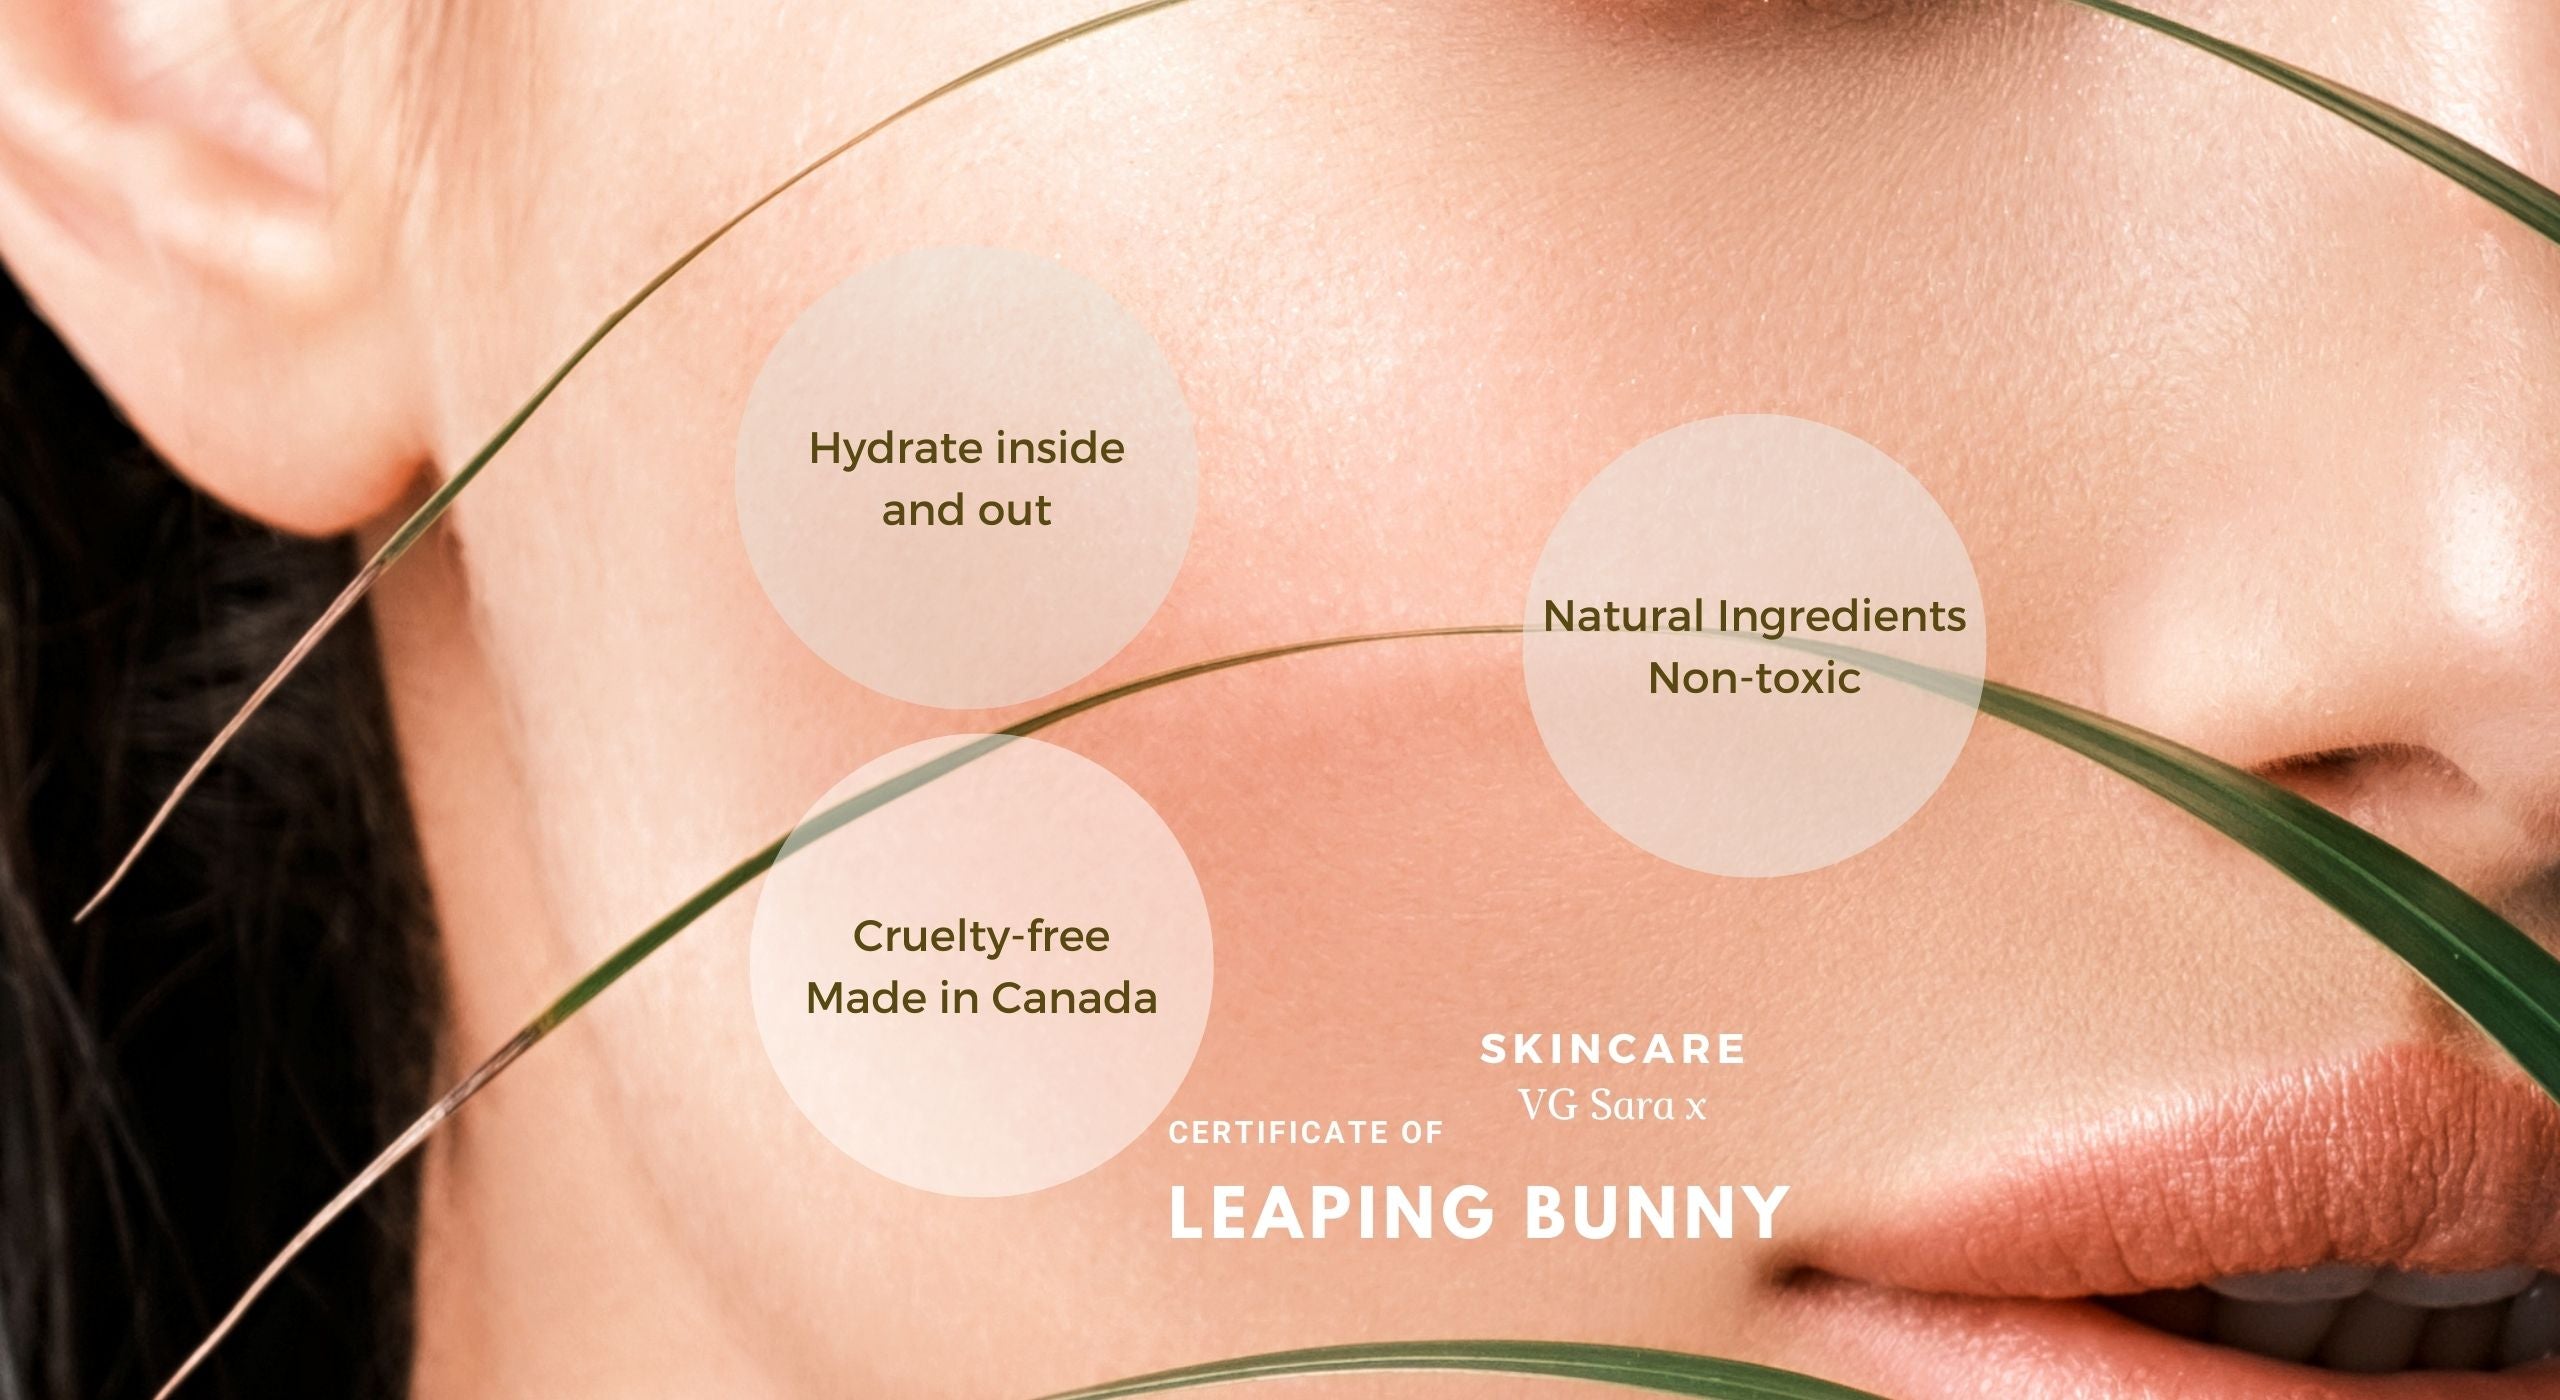 skincare collection of cruelty-free, non toxic face skincare products certified leapping bunny